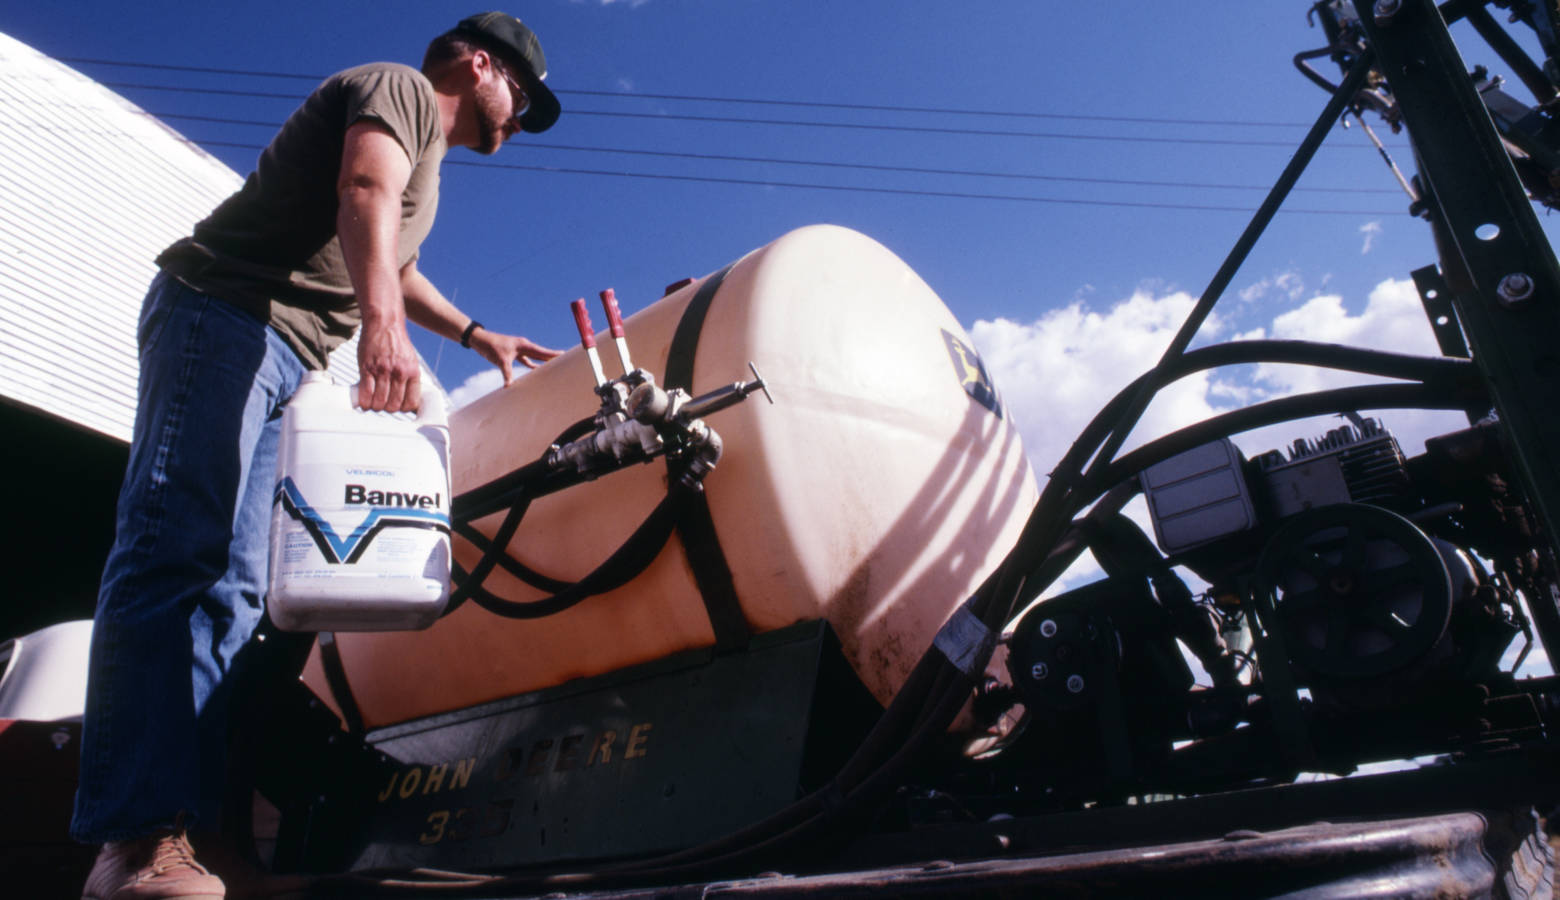 An old photo of a man filling a sprayer tank with Banvel, a brand name for dicamba herbicide in 1985. (USDA NRCS)